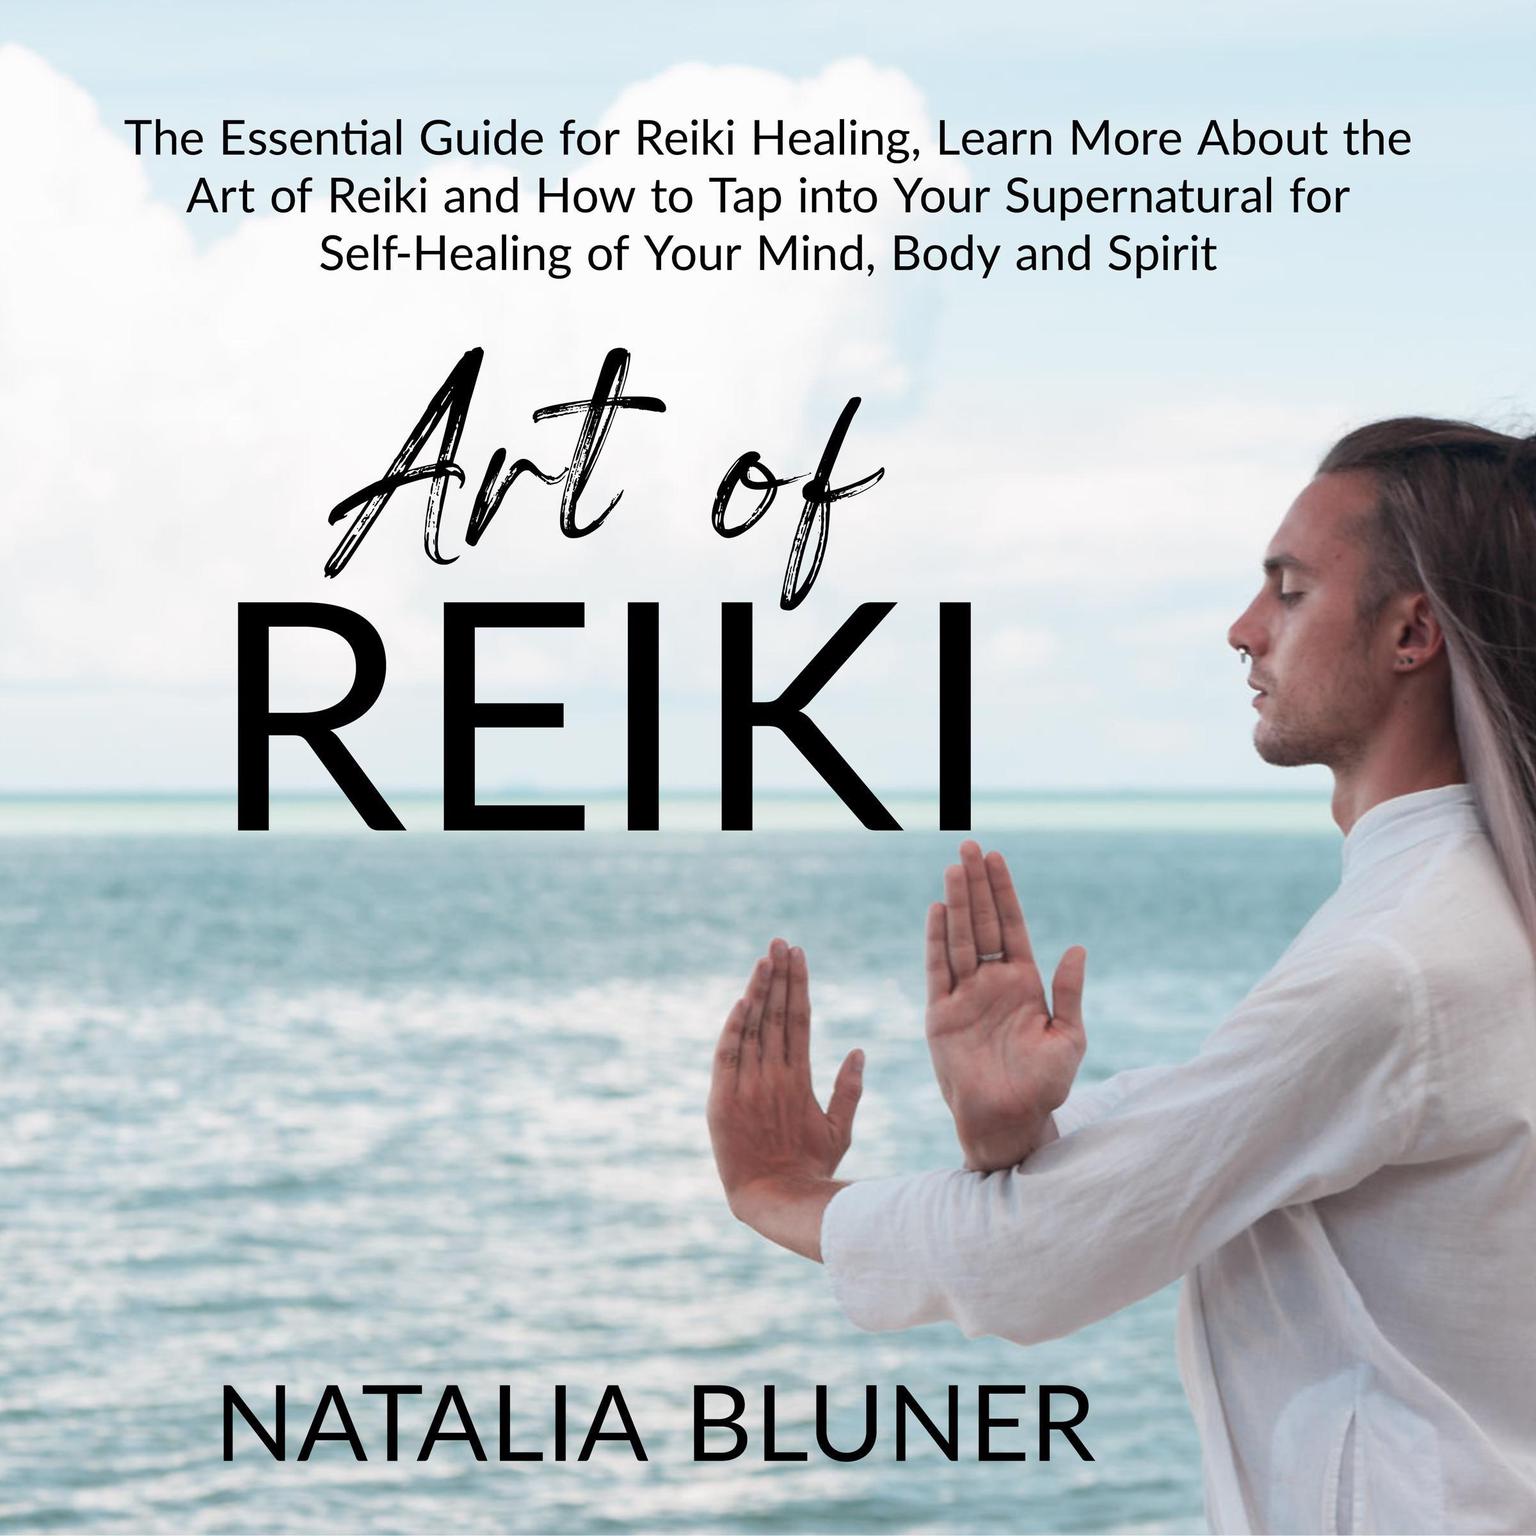 The Art of Reiki: The Essential Guide for Reiki Healing, Learn More About the Art of Angelic Reiki and How to Tap into Your Supernatural for Self-Healing of Your Mind, Body and Spirit Audiobook, by Natalia Bluner